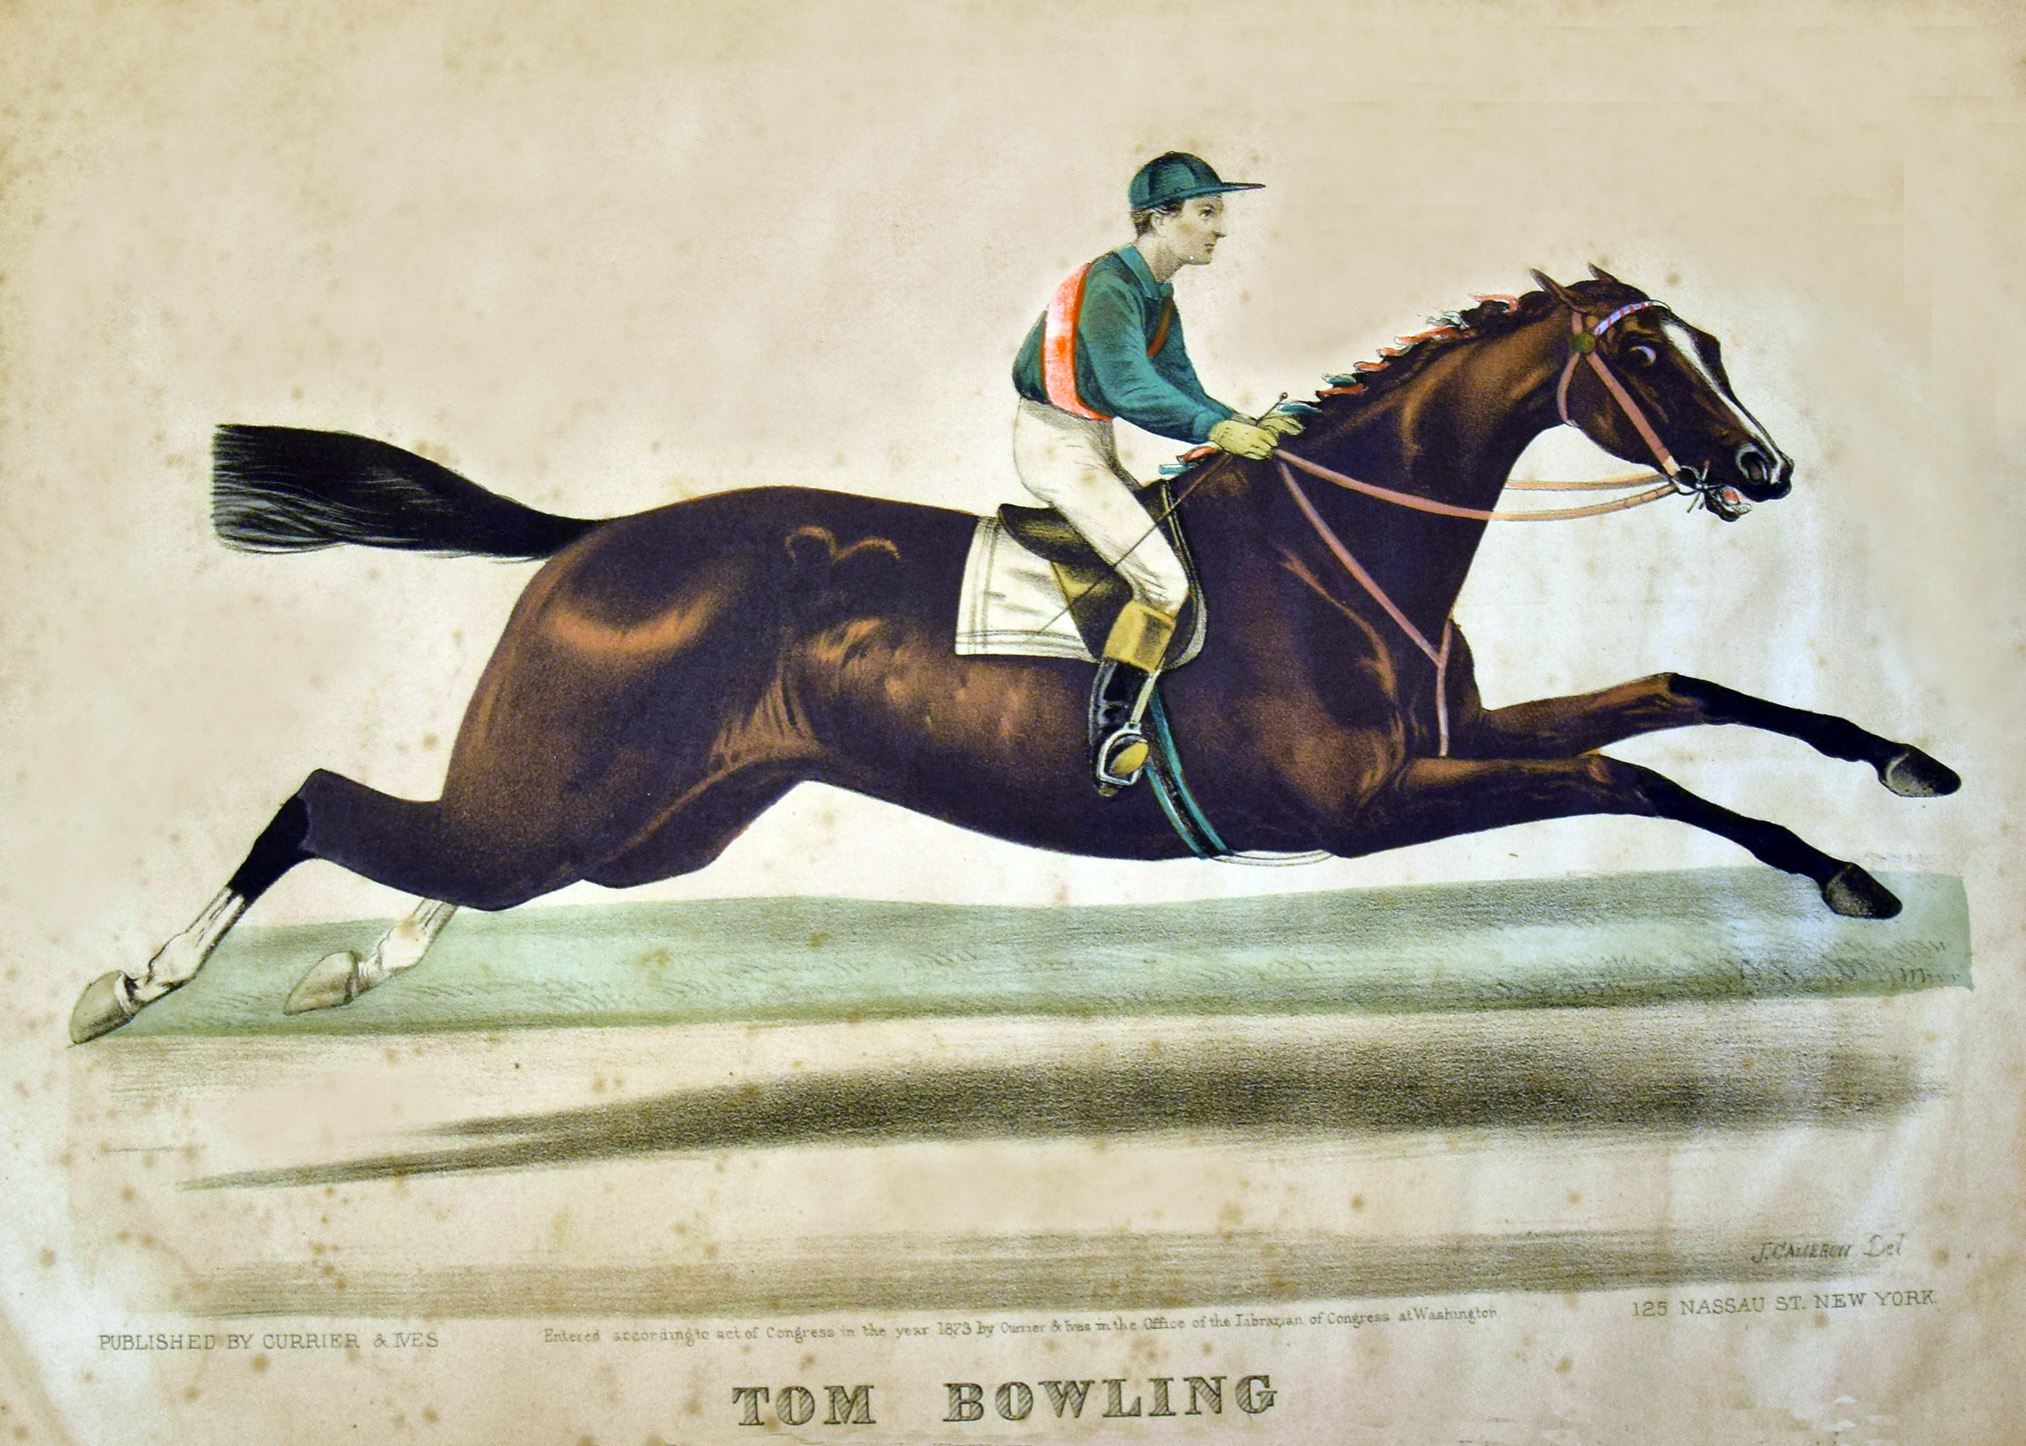 1873 Currier & Ives print of Tom Bowling (Museum Collection)